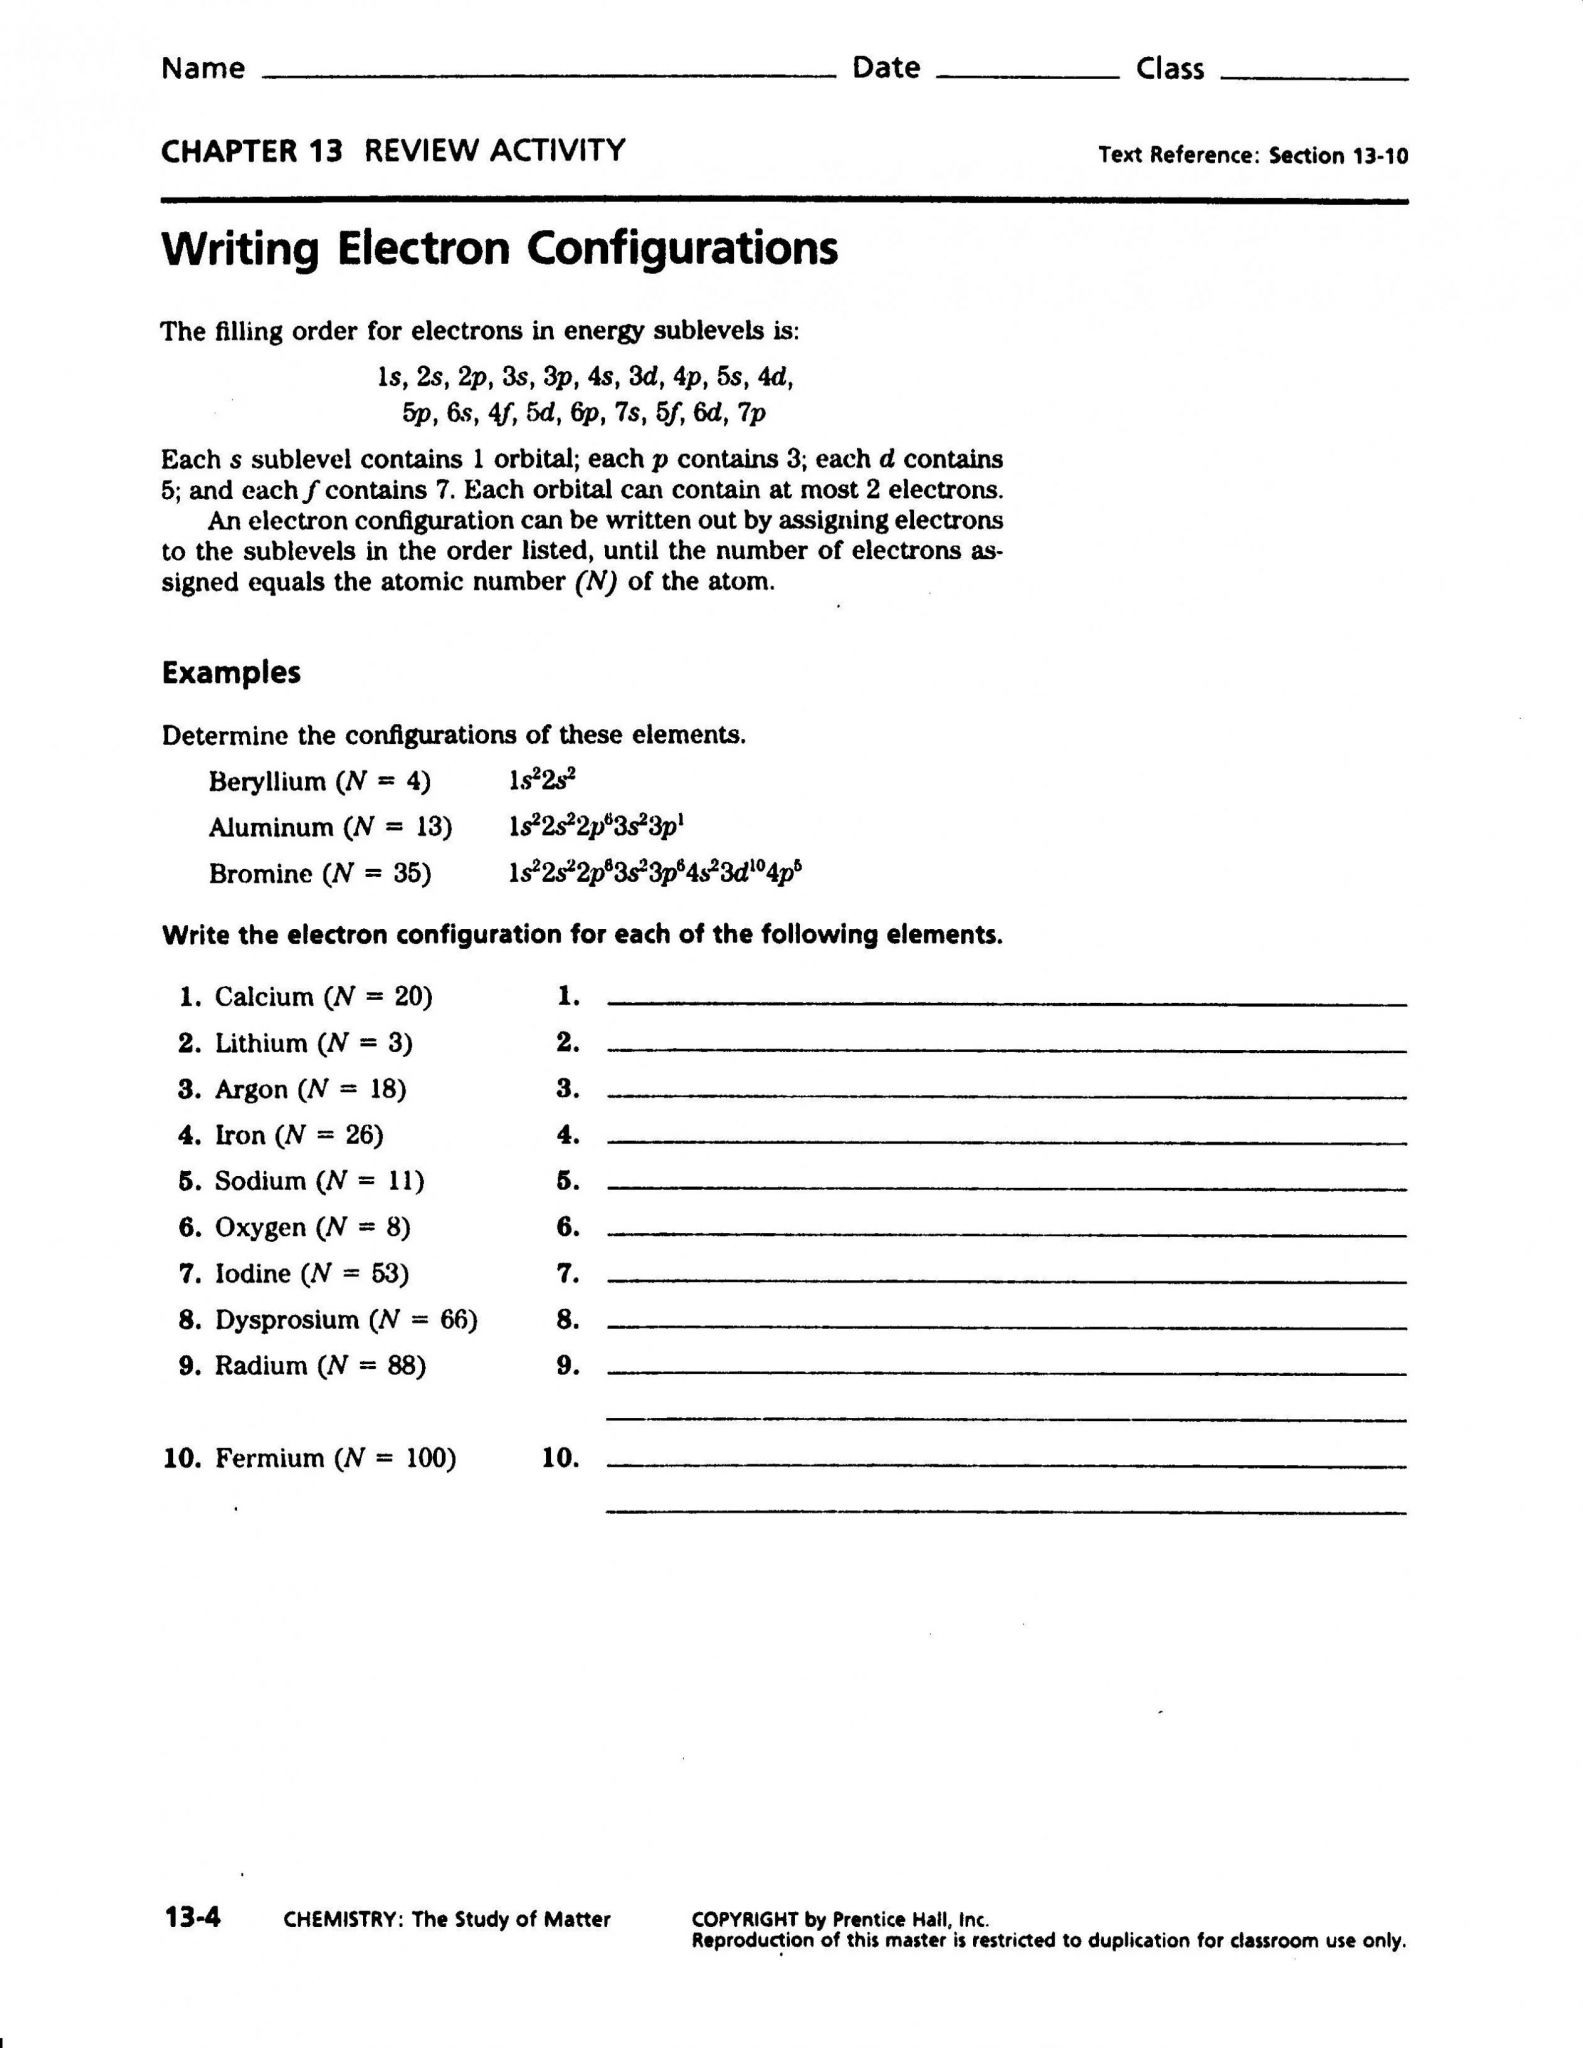 protons-neutrons-and-electrons-worksheet-answer-key